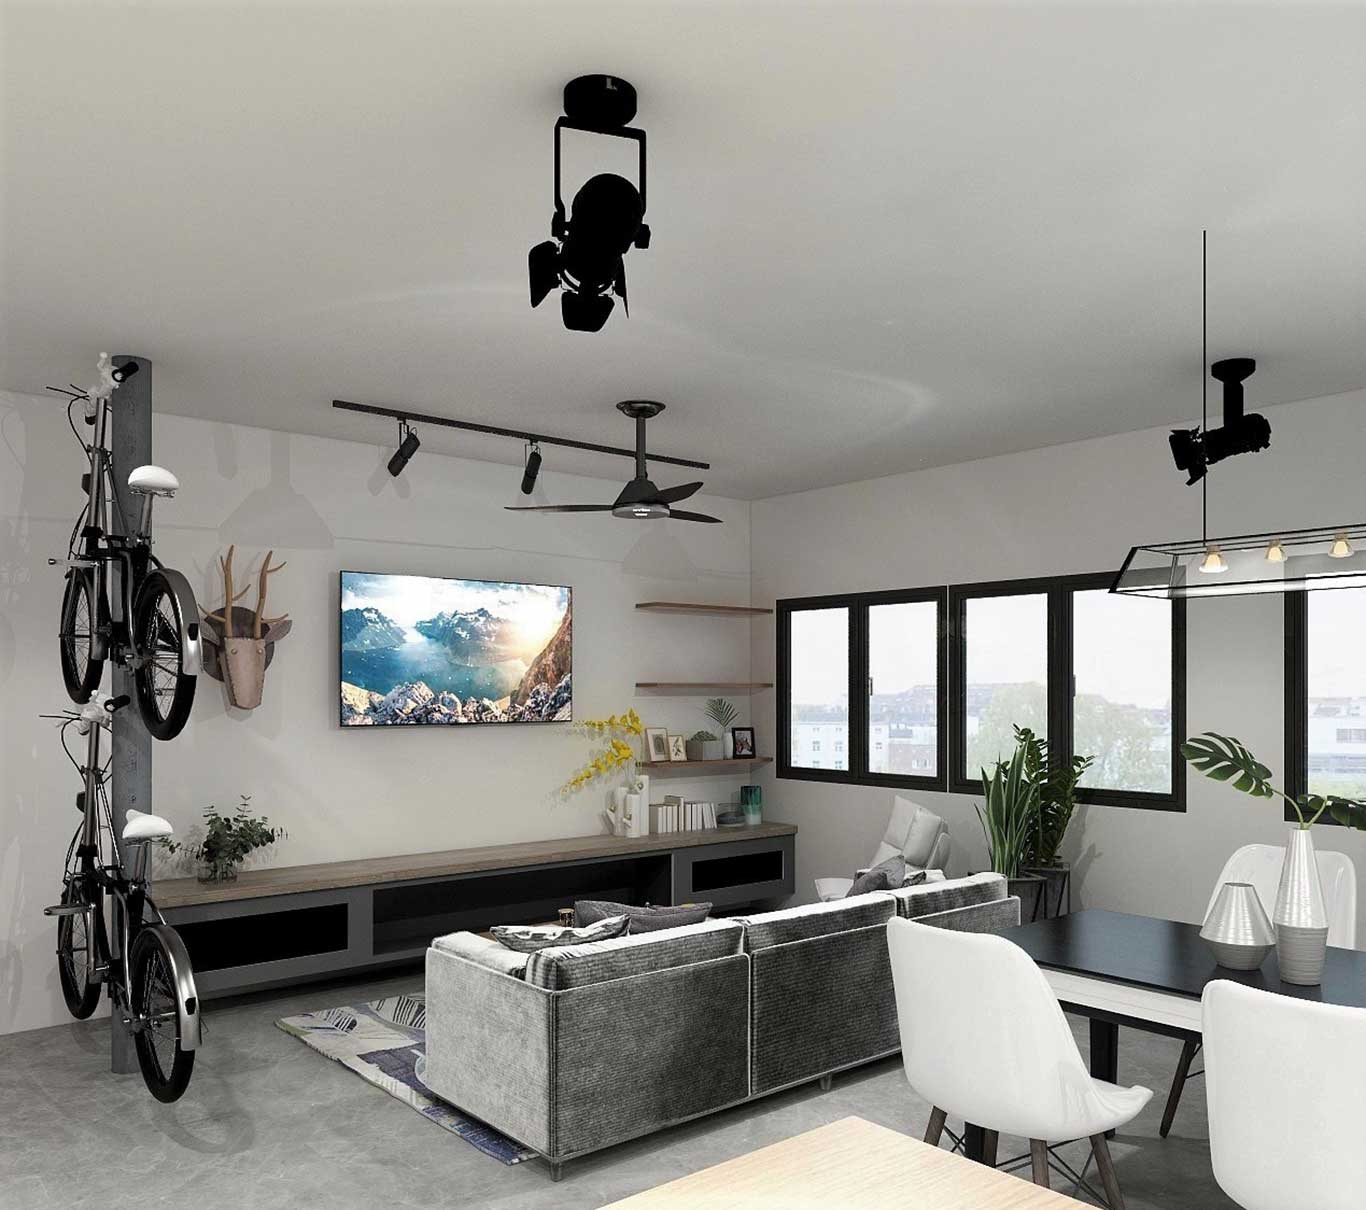 Track lights encased in black metallic accents hanged up in the living room of an Industrial interior design